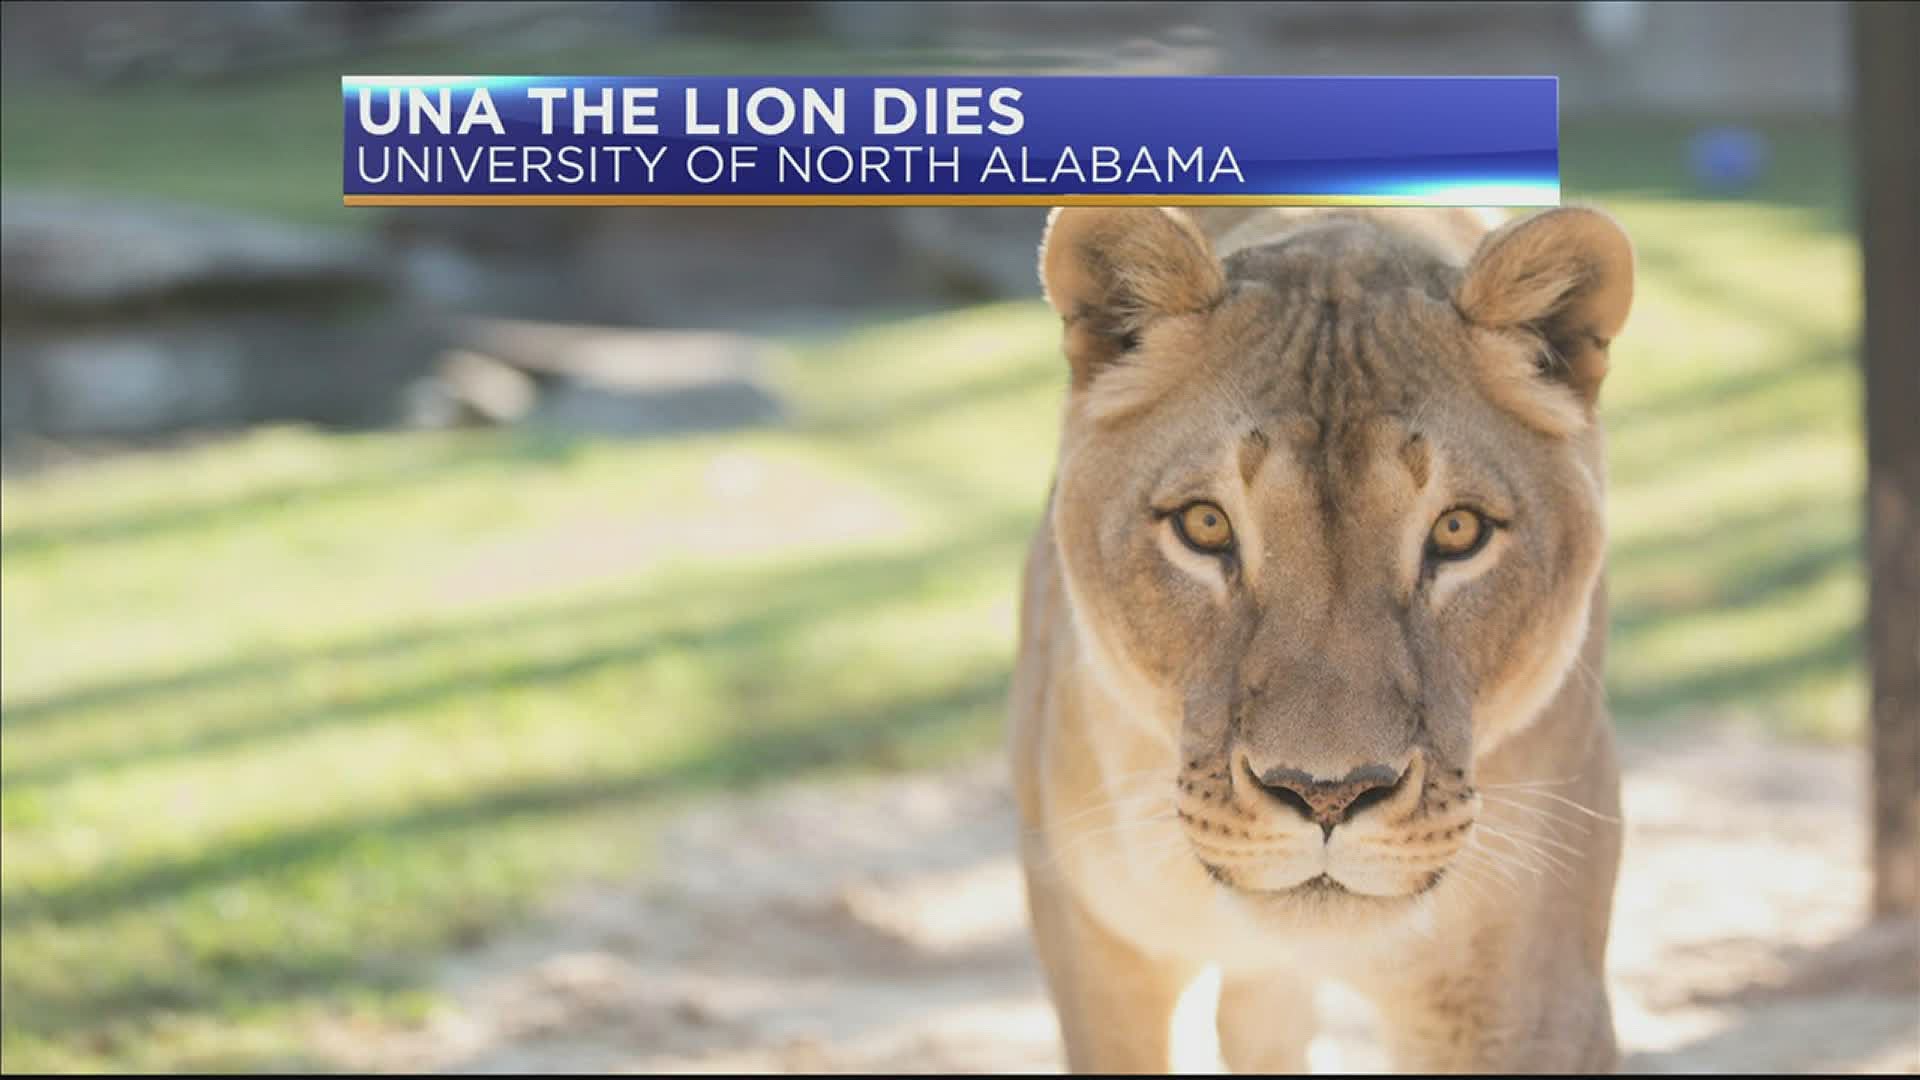 Sad news out of the University of North Alabama today.